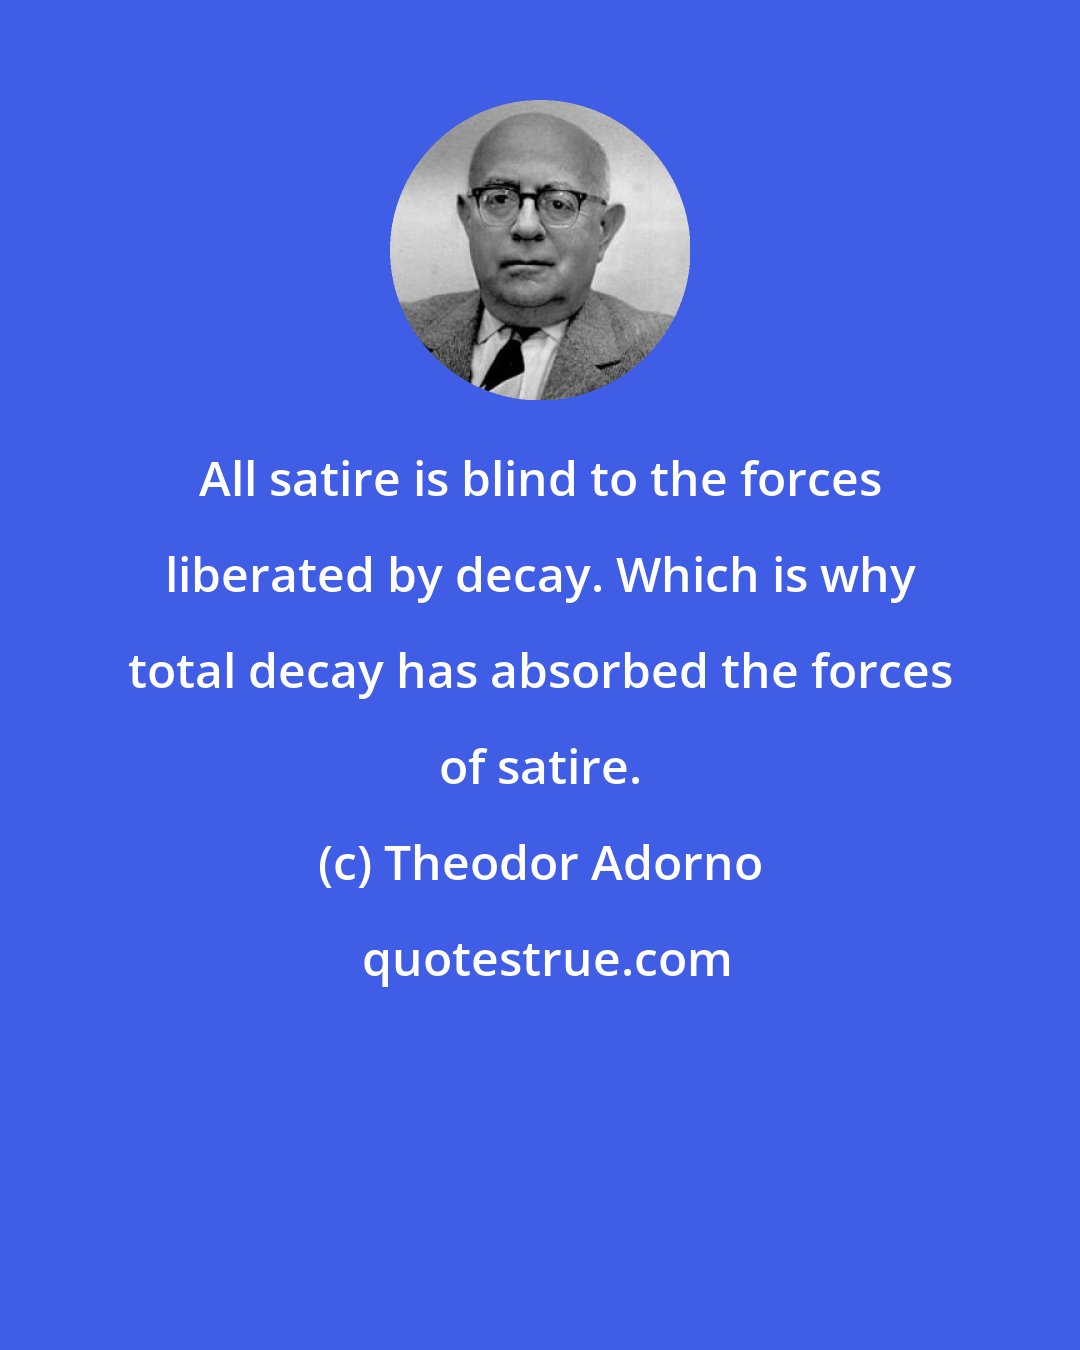 Theodor Adorno: All satire is blind to the forces liberated by decay. Which is why total decay has absorbed the forces of satire.